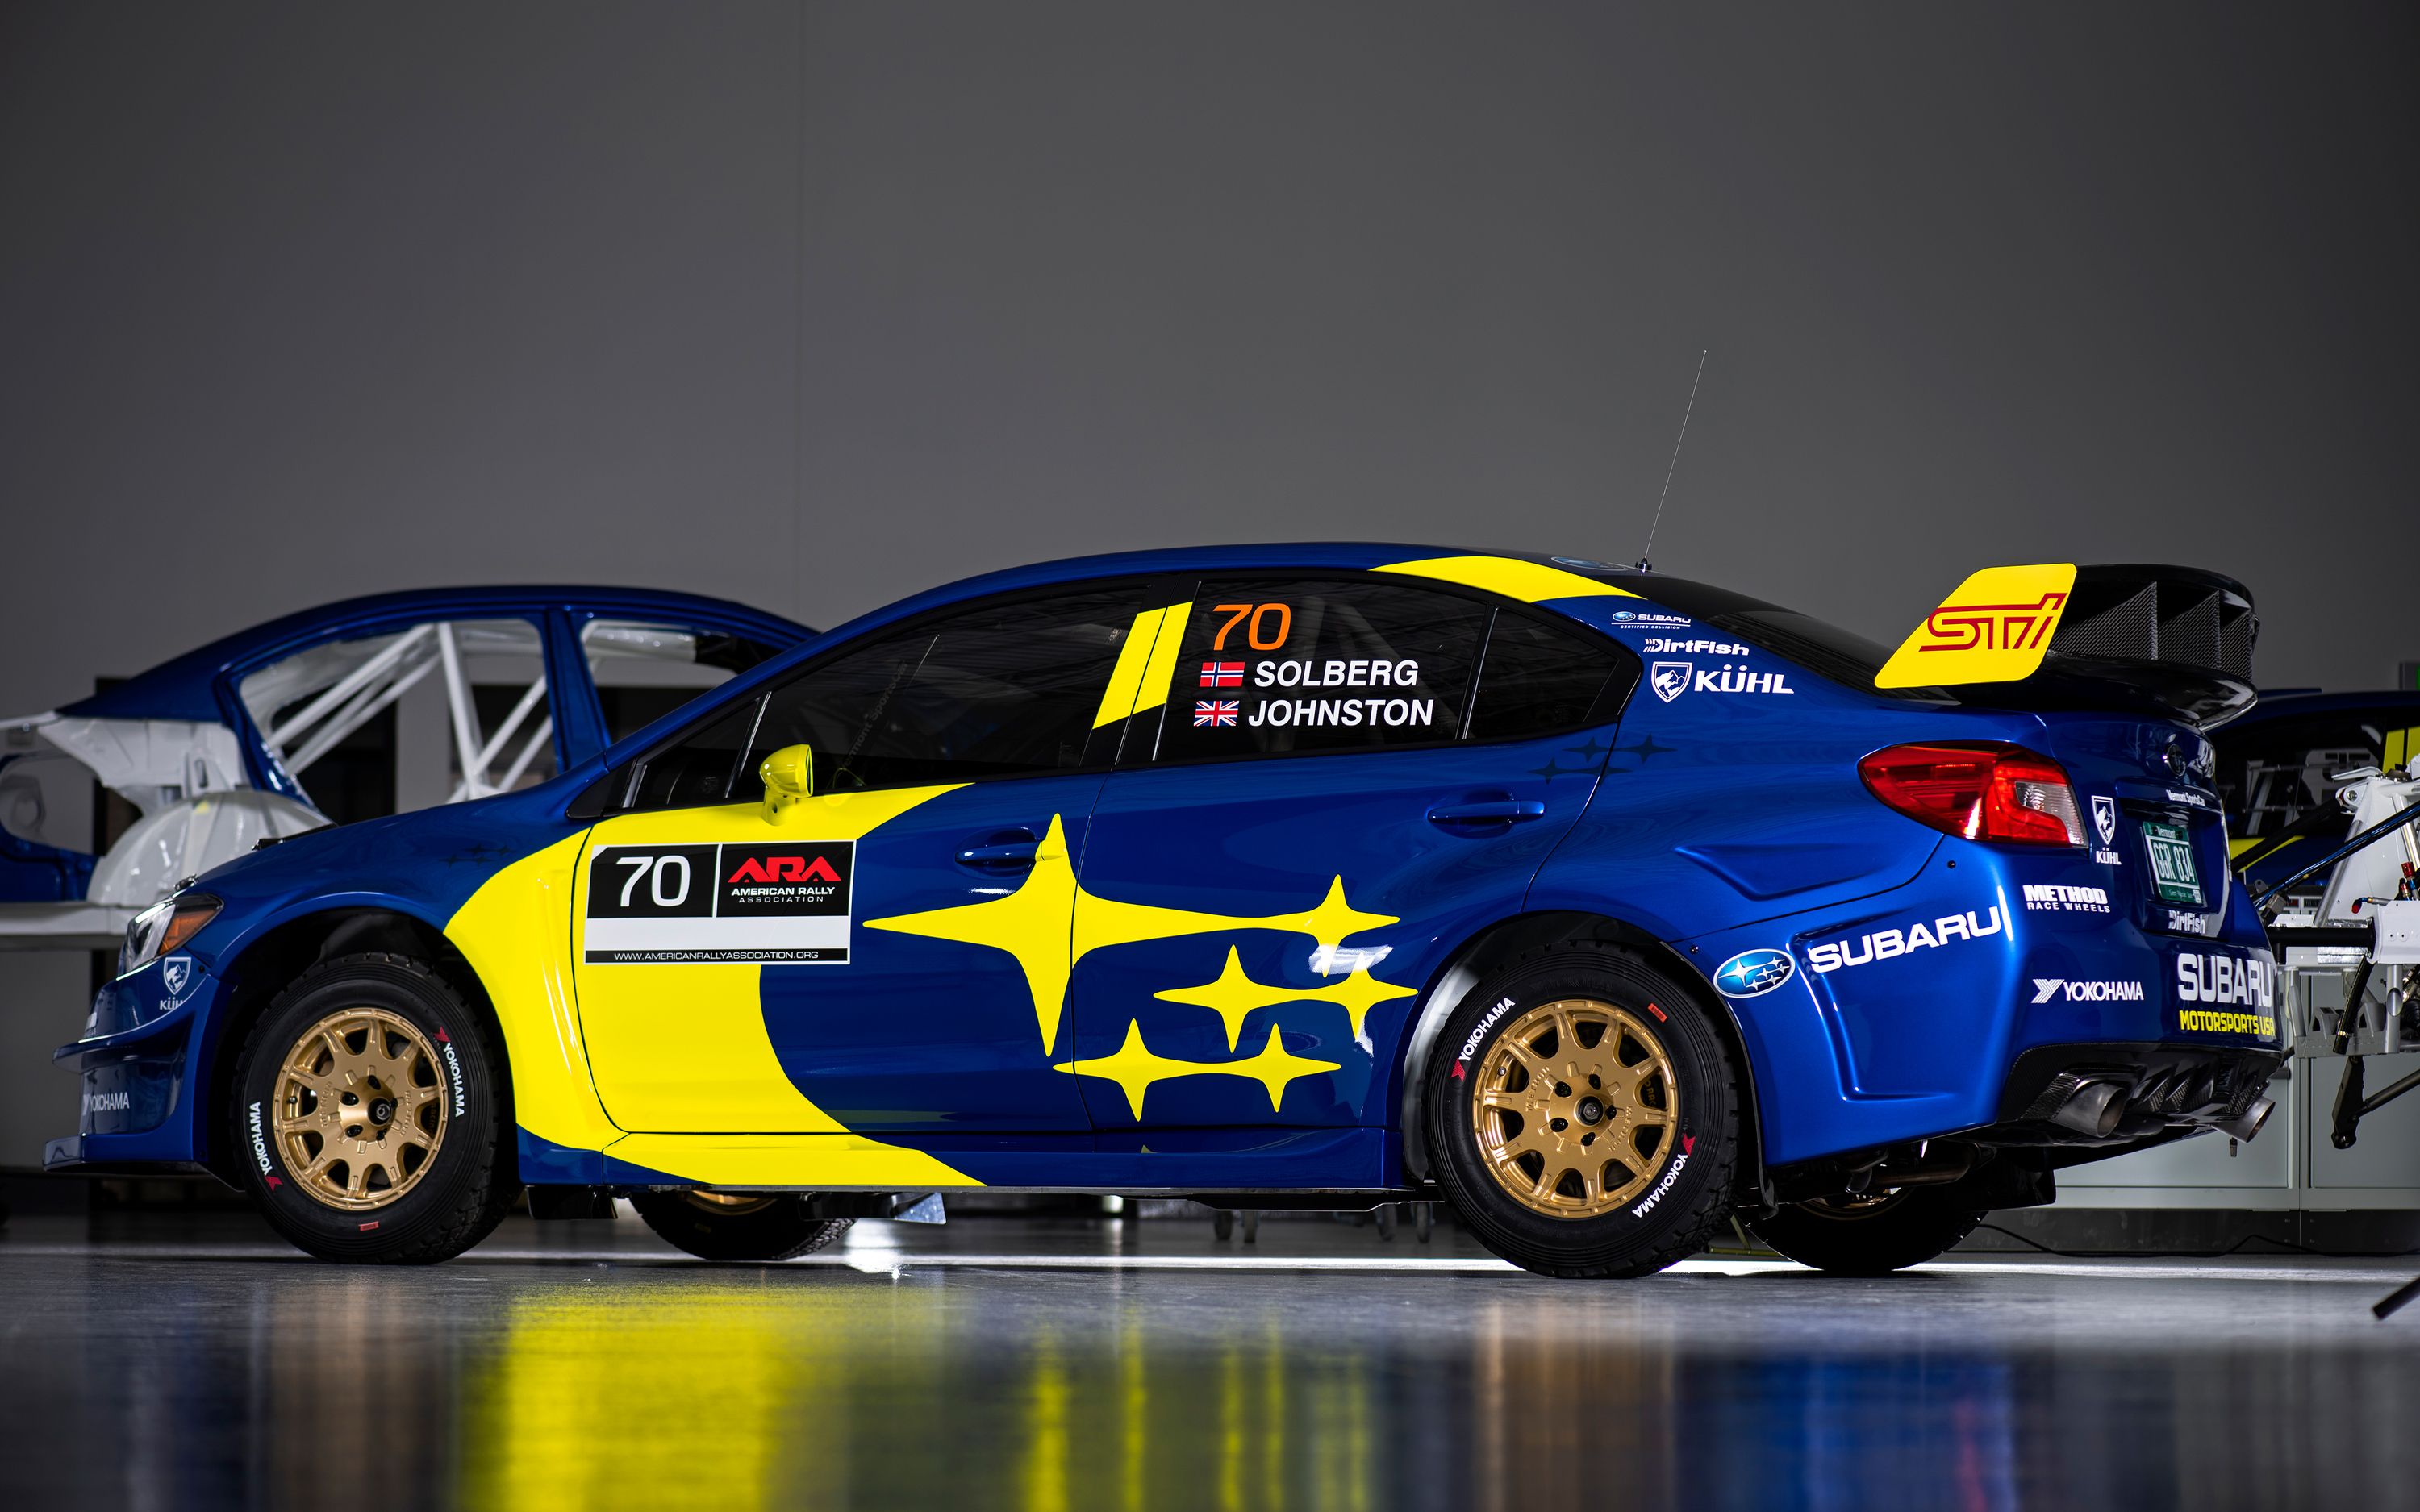 Top rally cars ready to compete in the 2019 ARA Championship